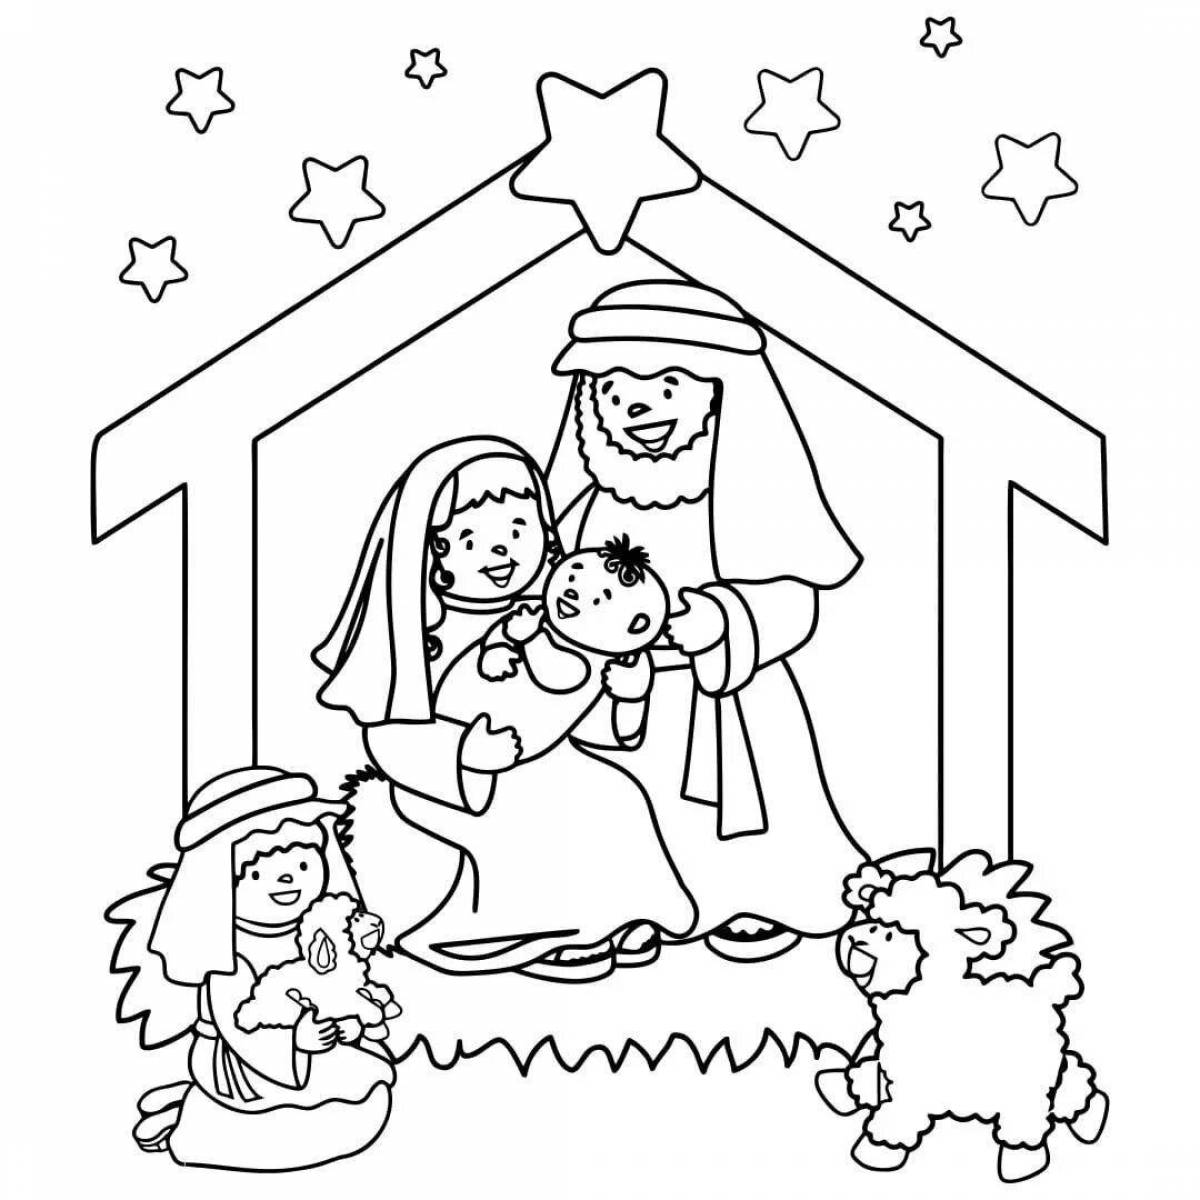 Deluxe coloring book with Christmas card